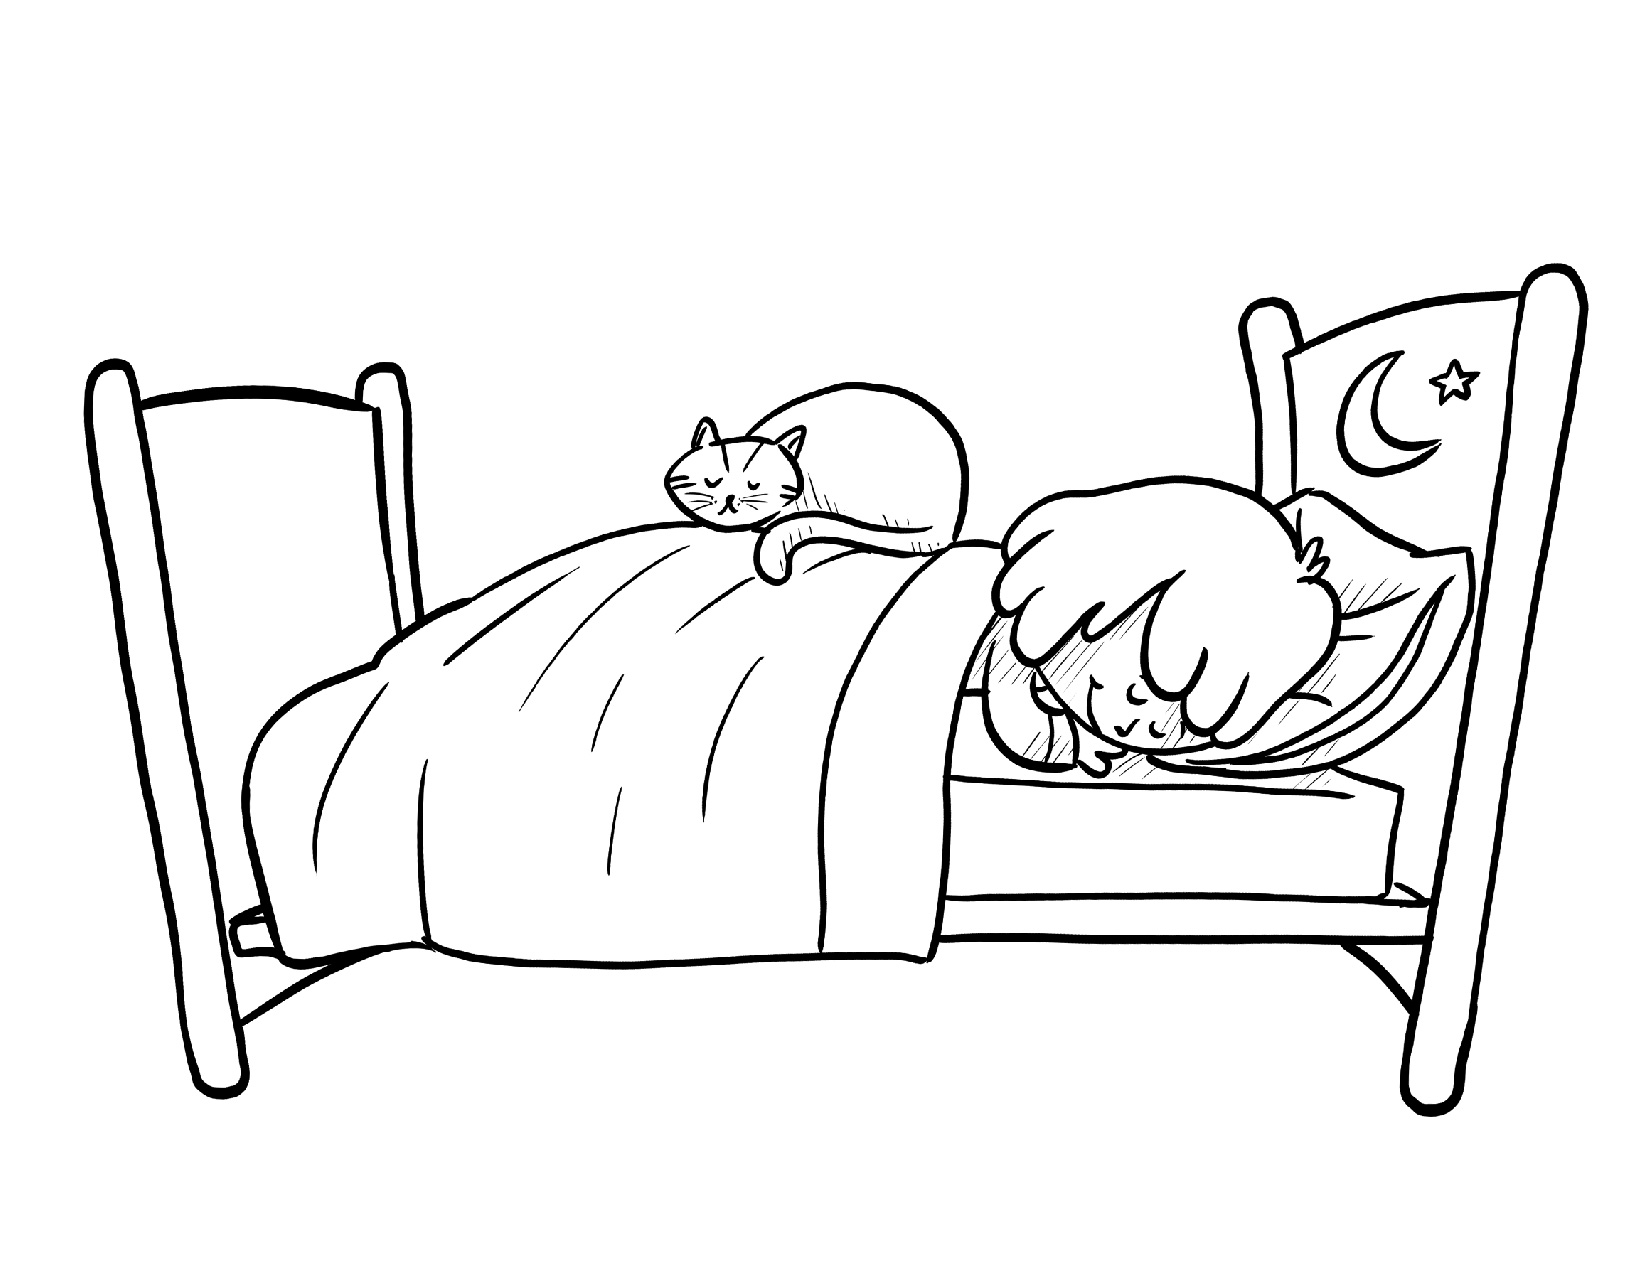 Coloring page of a young girl in bed with her cat